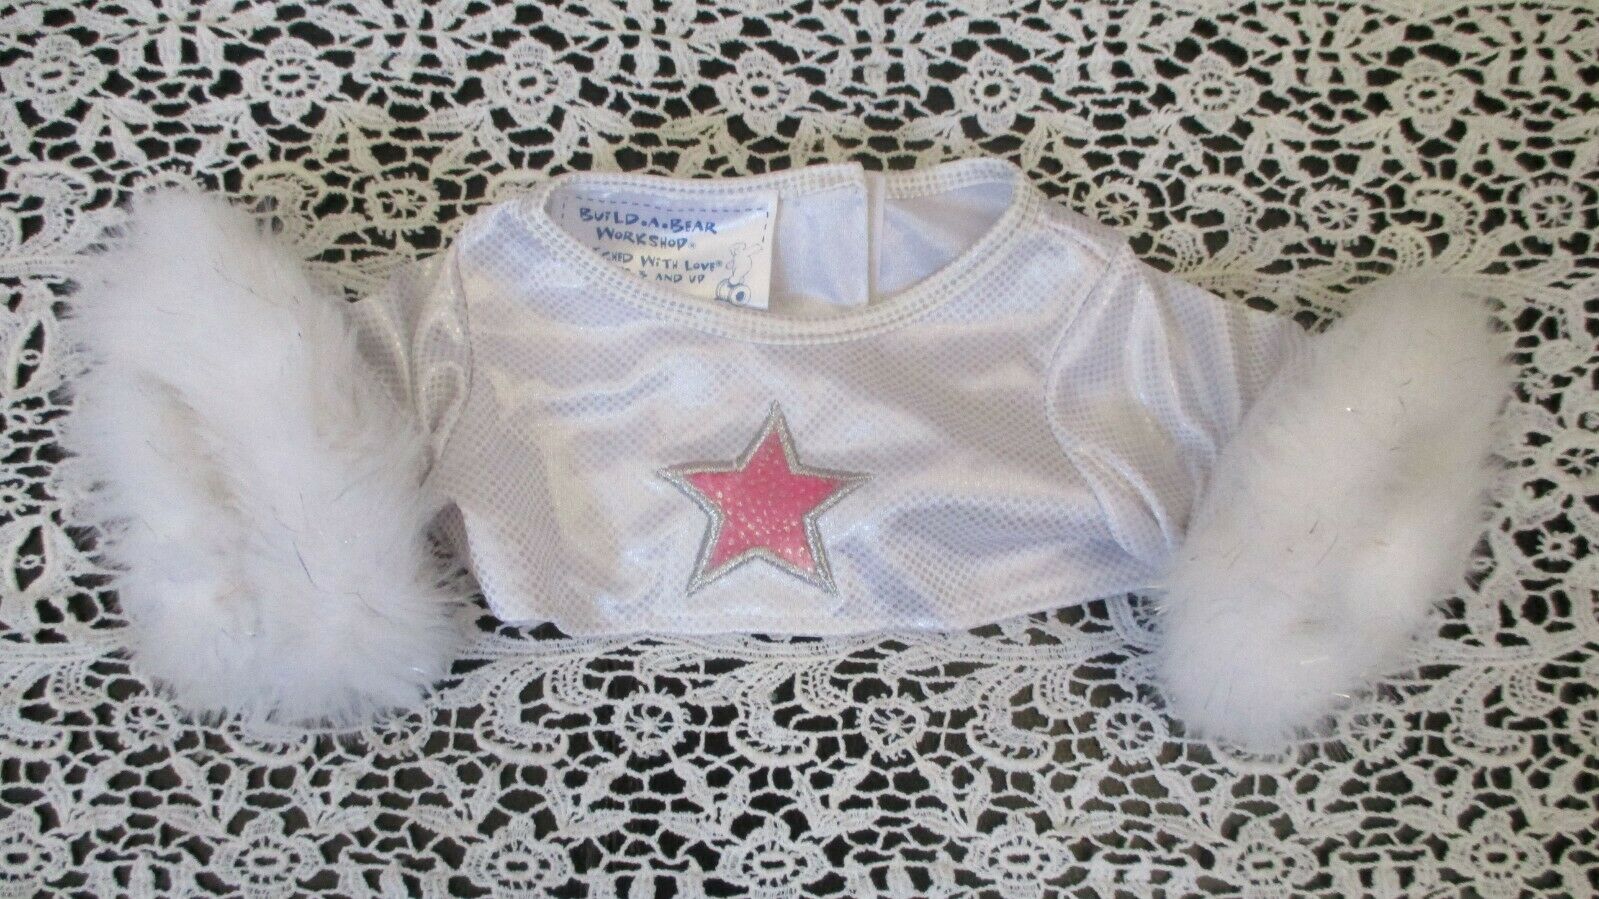 Build A Bear Silver Sparkle Top With Furry Trim & Pink Star On Front